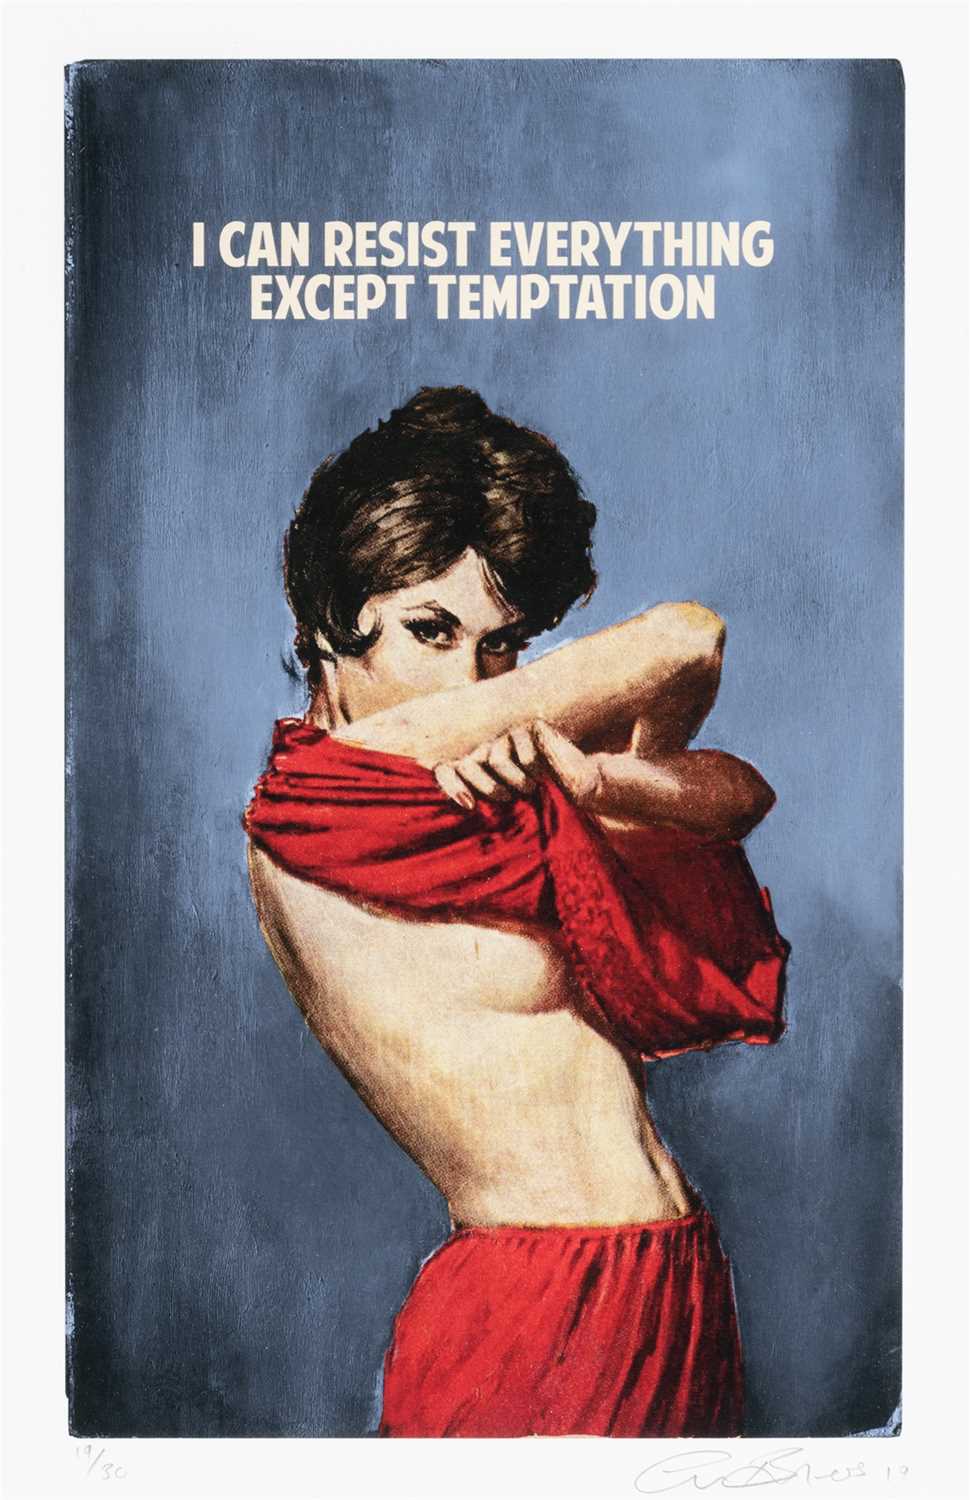 Lot 20 - Connor Brothers (British Duo), 'I Can Resist Everything Except Temptation (Special Edition)', 2019